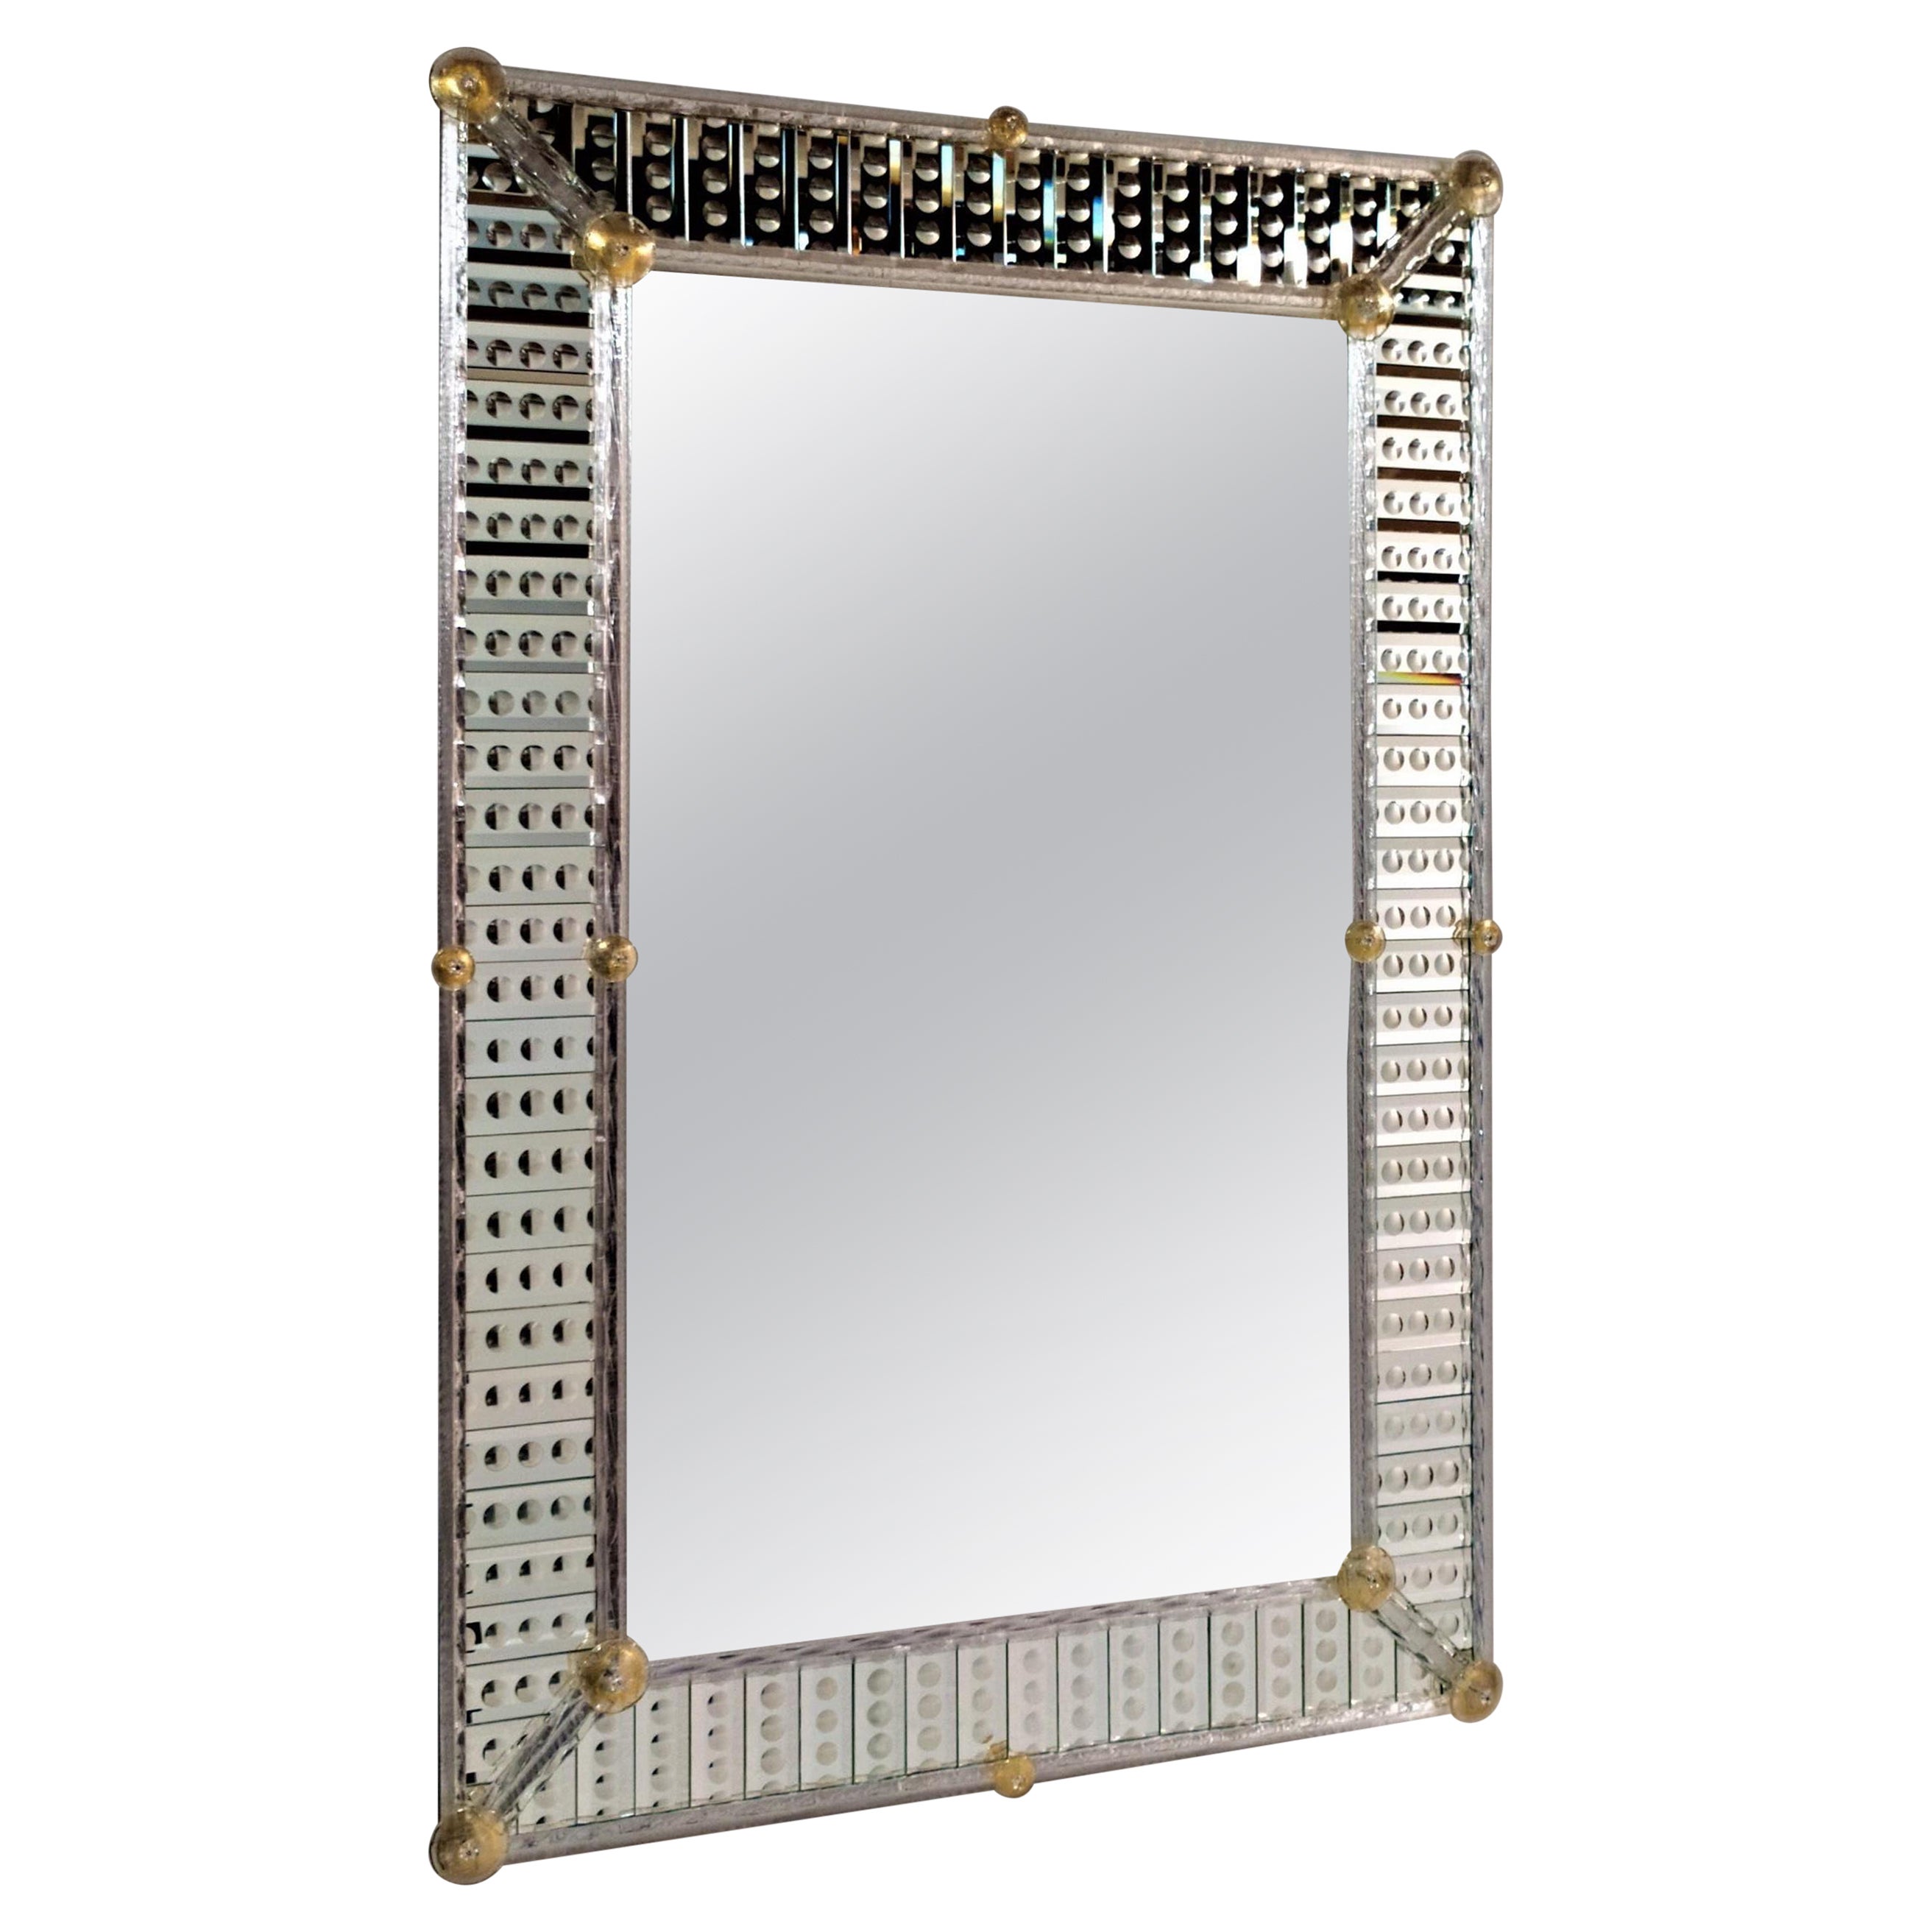 "Padova" Murano Glass Mirror Rectangular, in Venetian Style by Fratelli Tosi For Sale